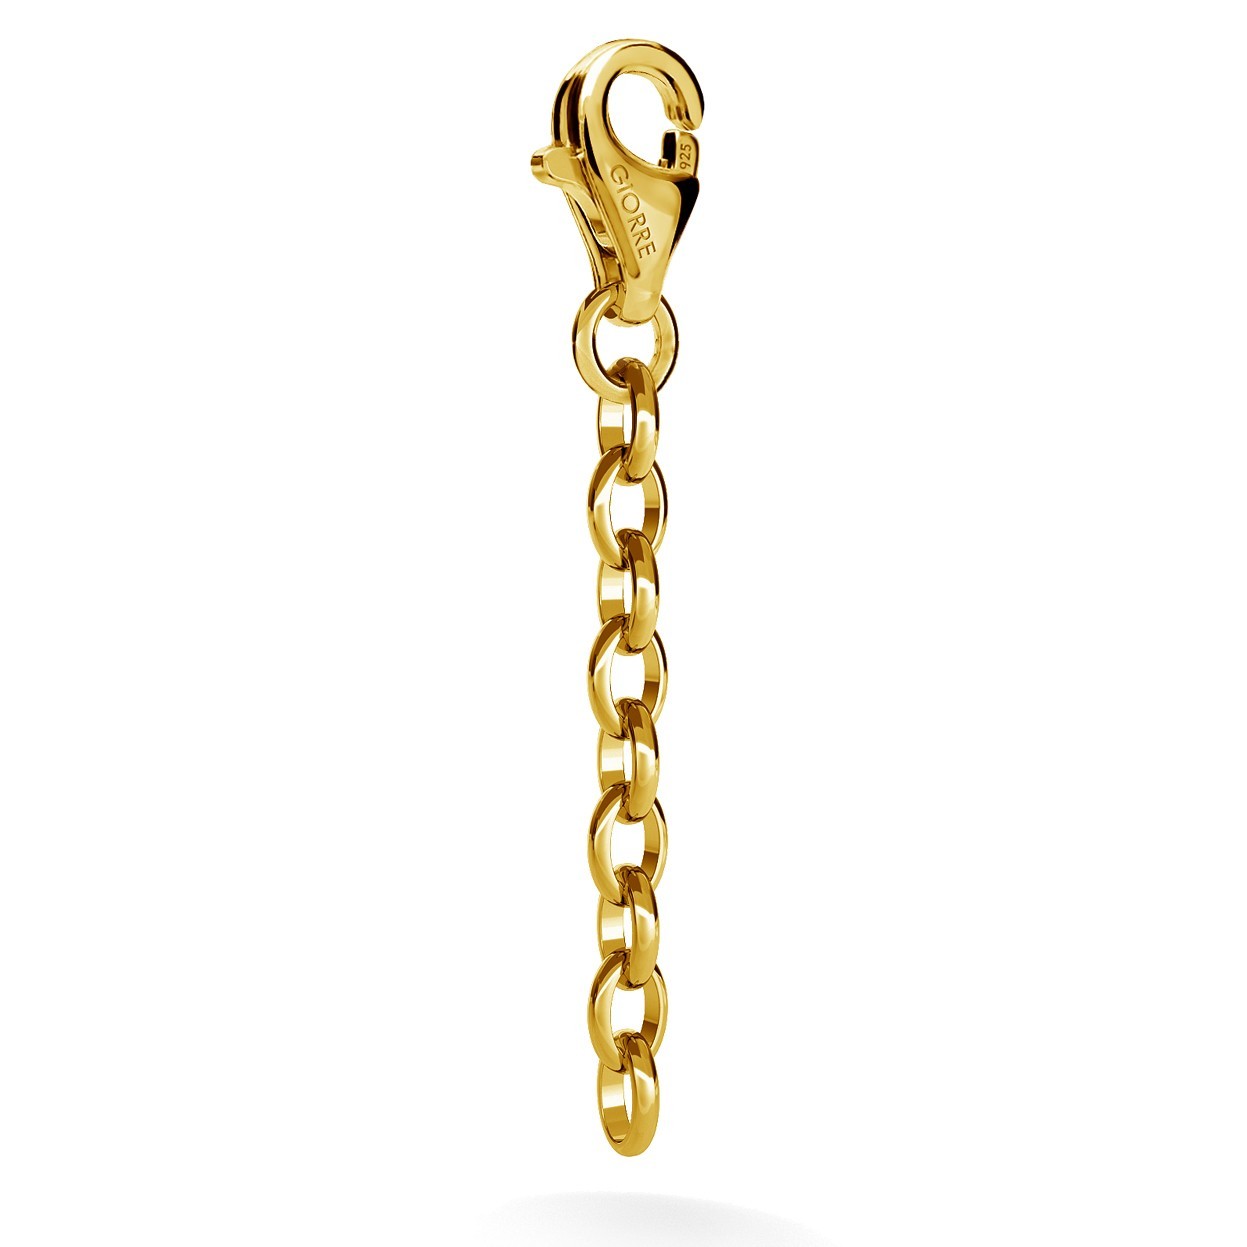 40 MM EXTENSION TO CHARMS GIORRE, STERLING SILVER (925) RHODIUM OR GOLD PLATED